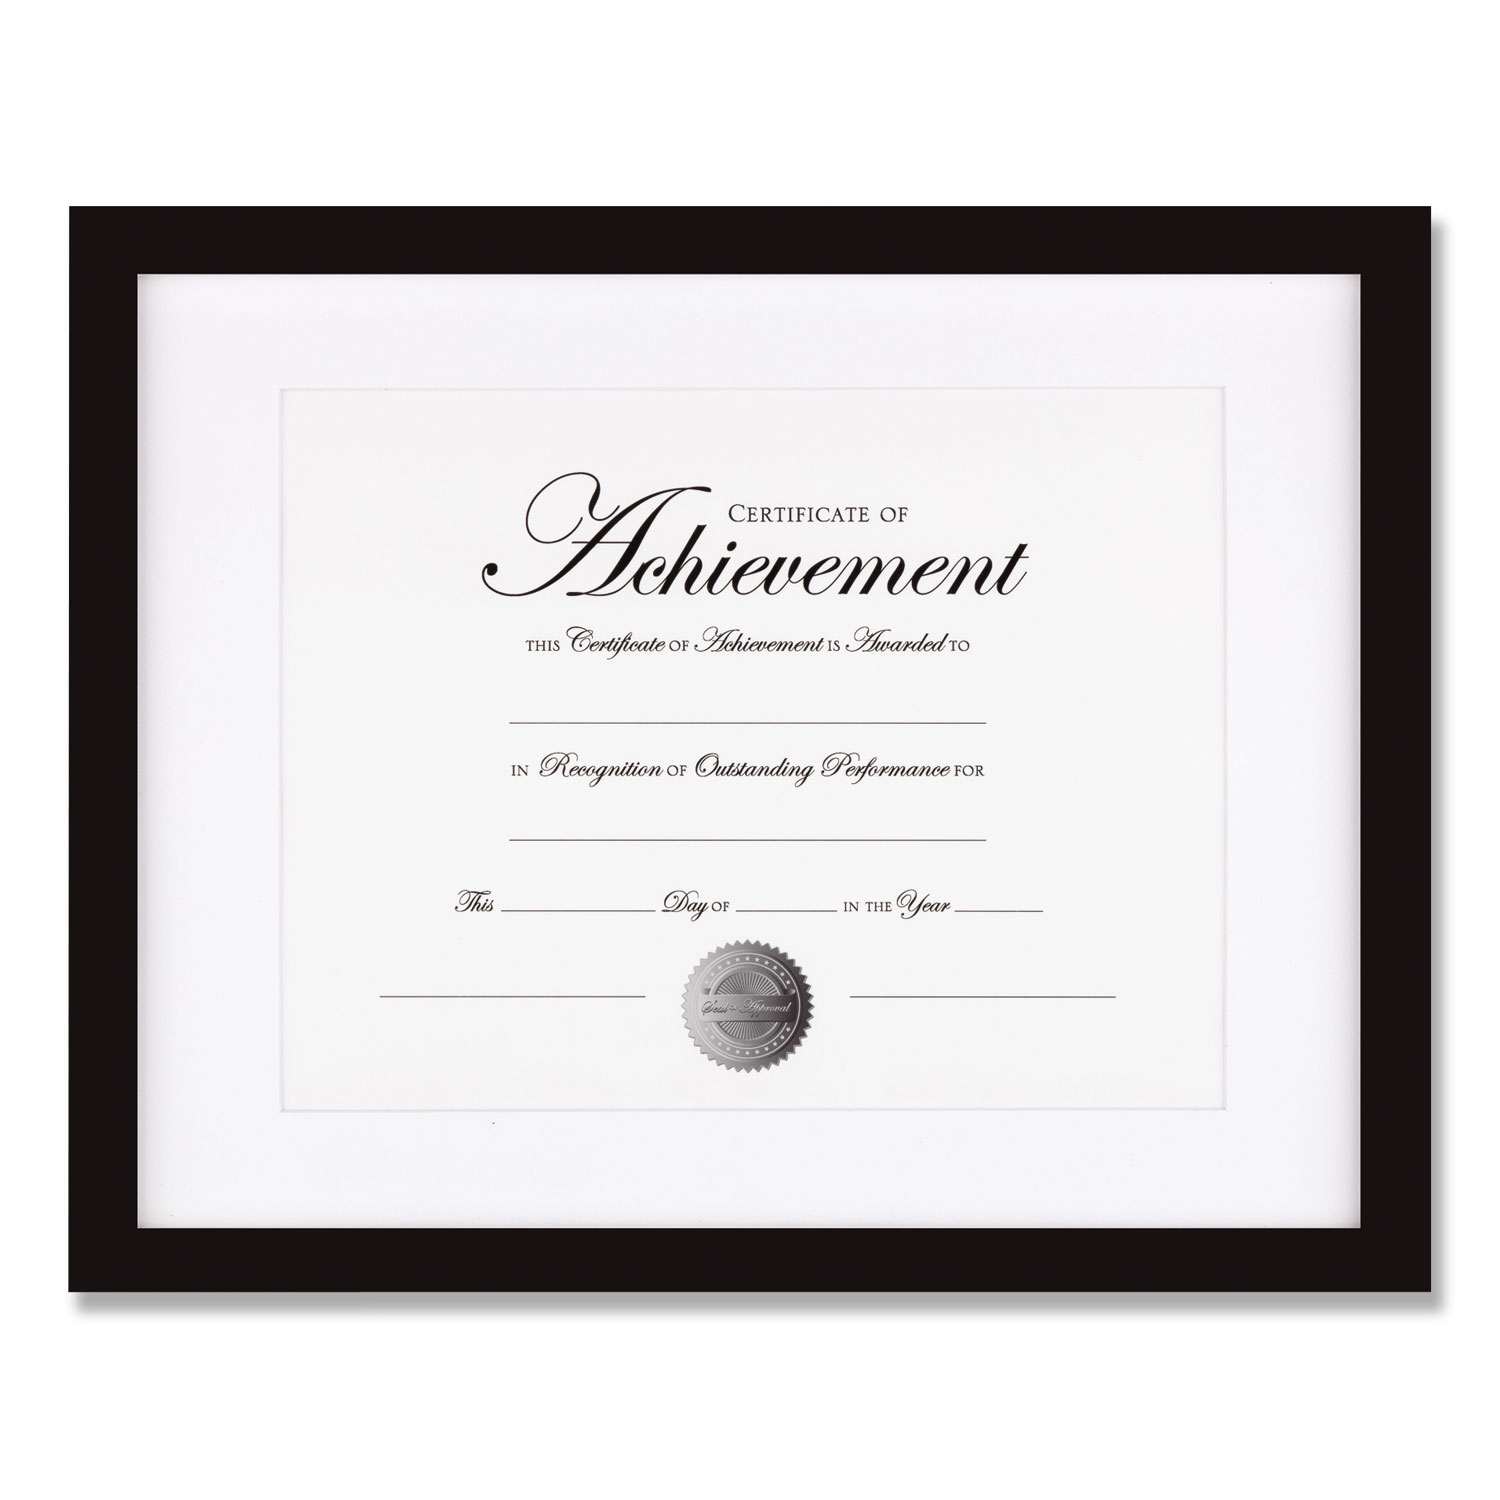 Wood Gallery Frame with Beveled Mat, 11 x 14, Black